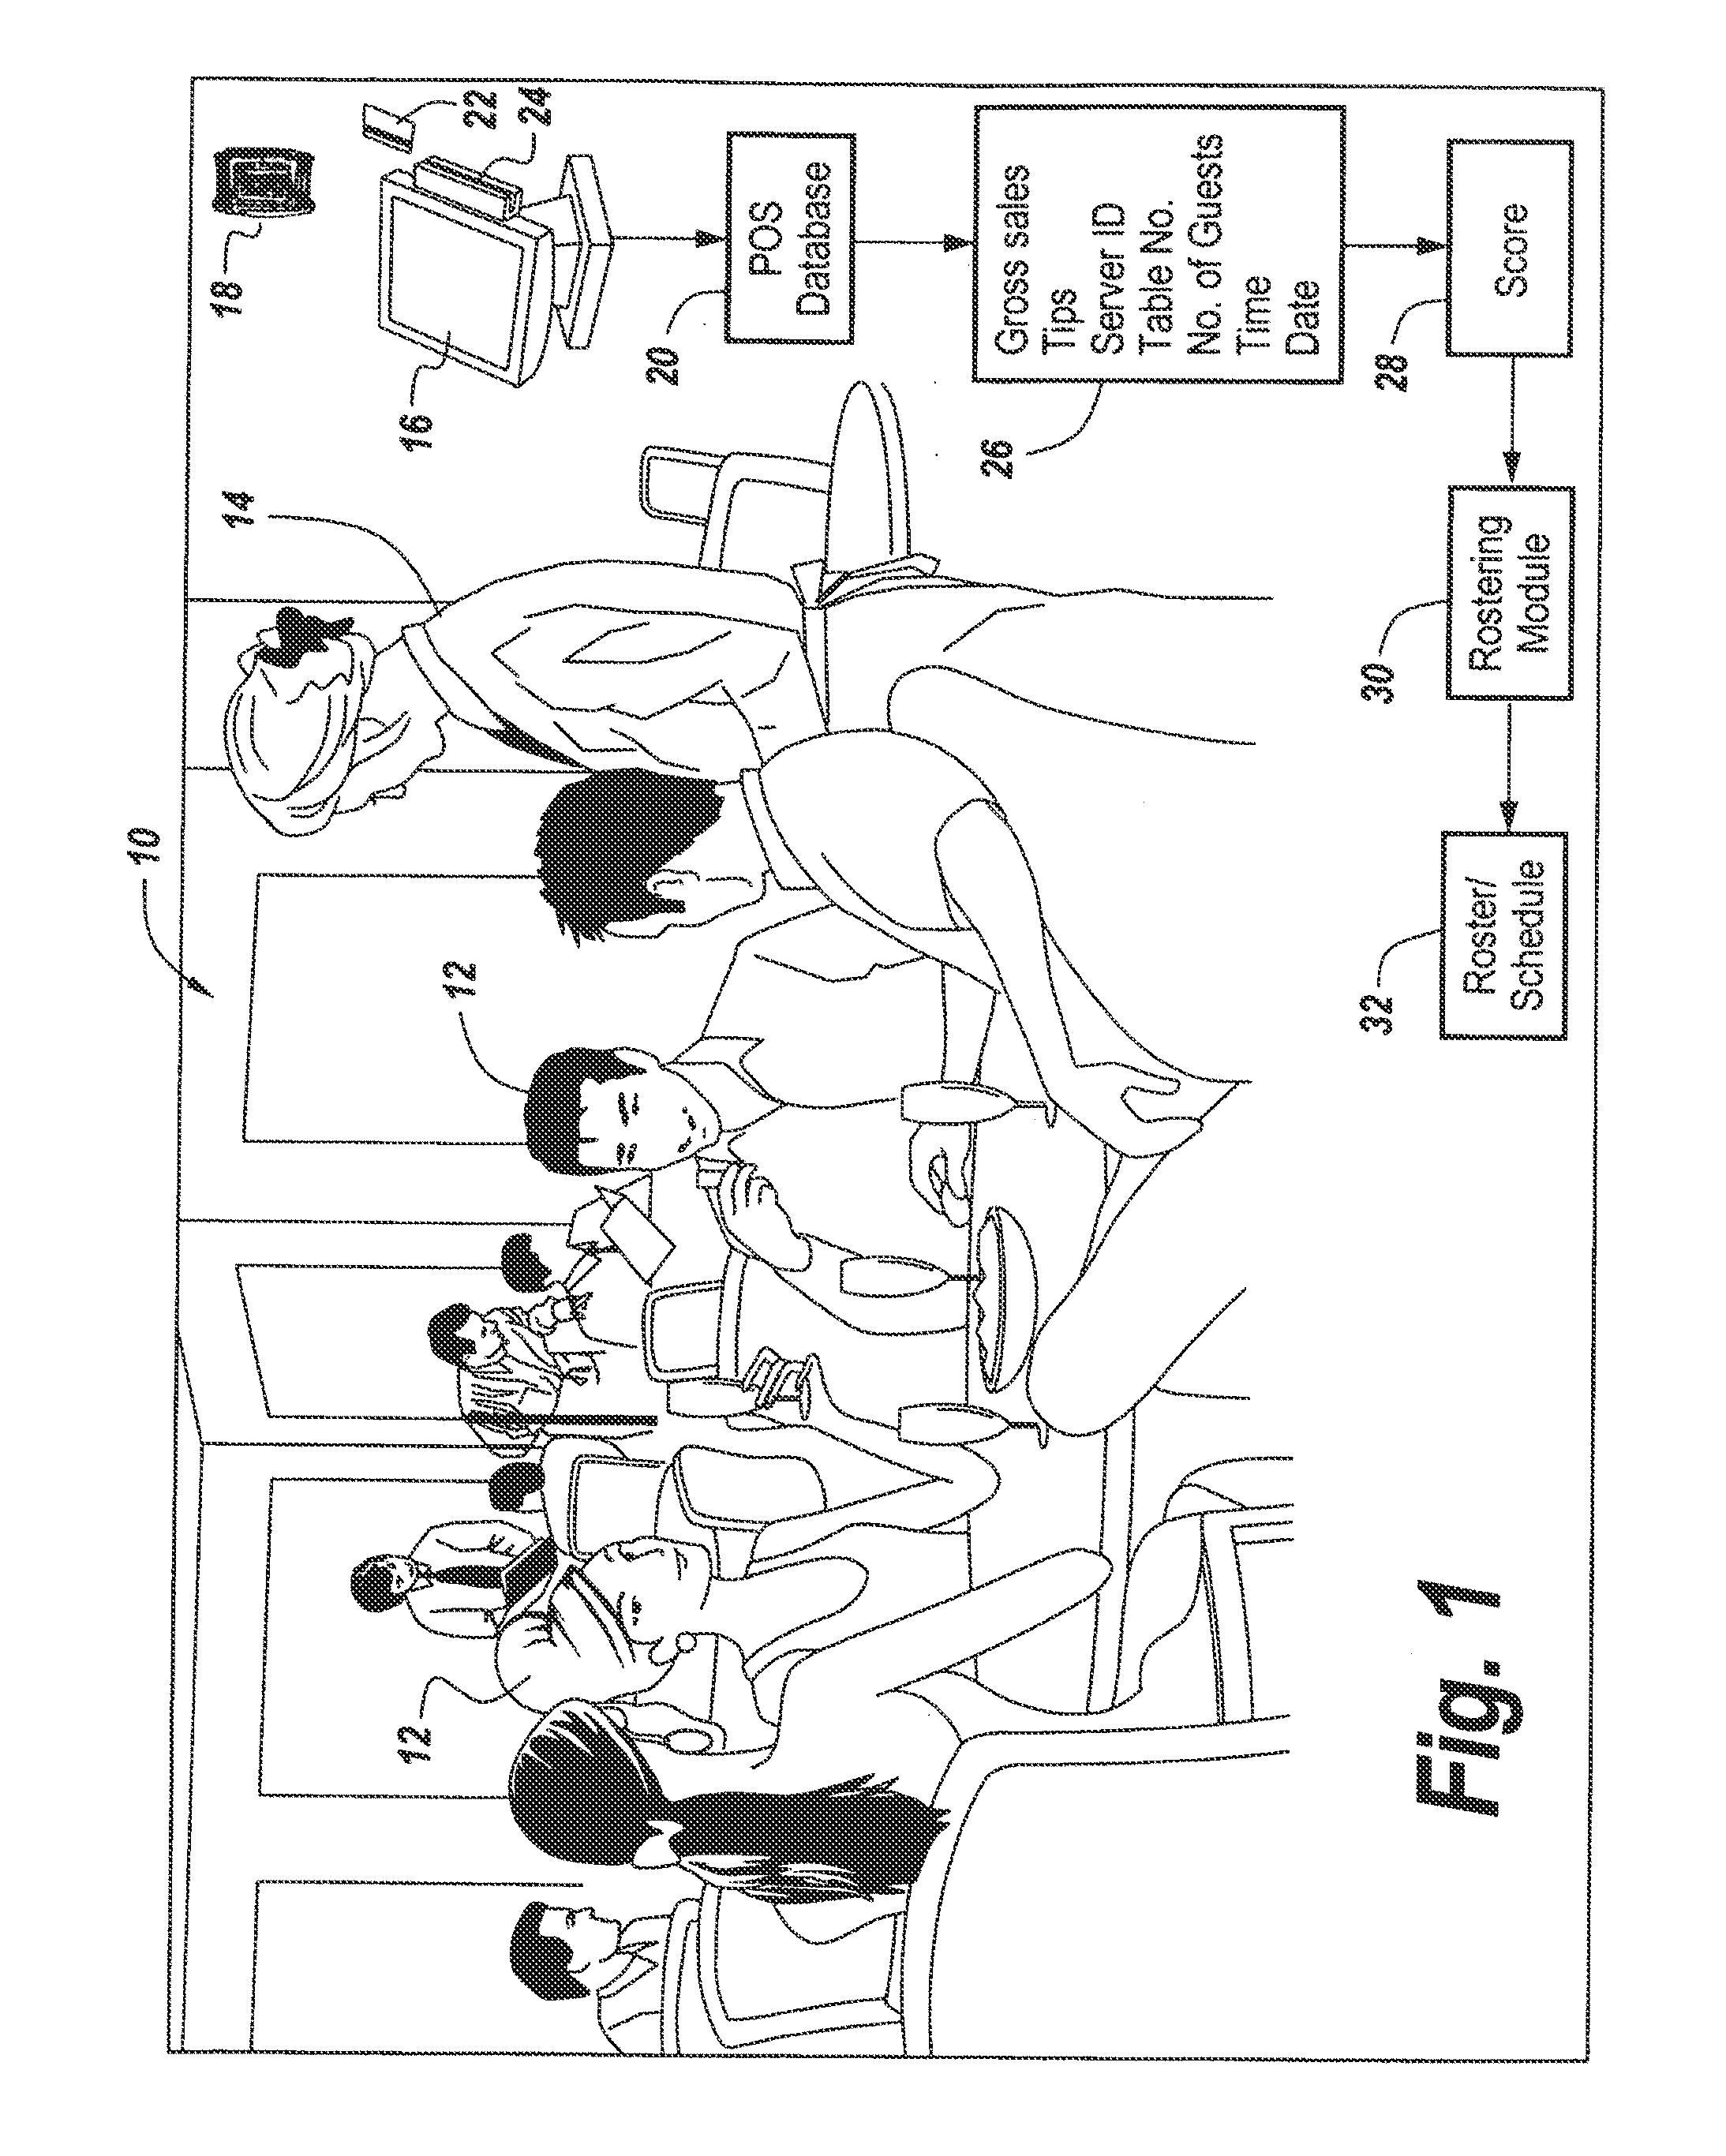 Method and system for scheduling staff based on normalized performance